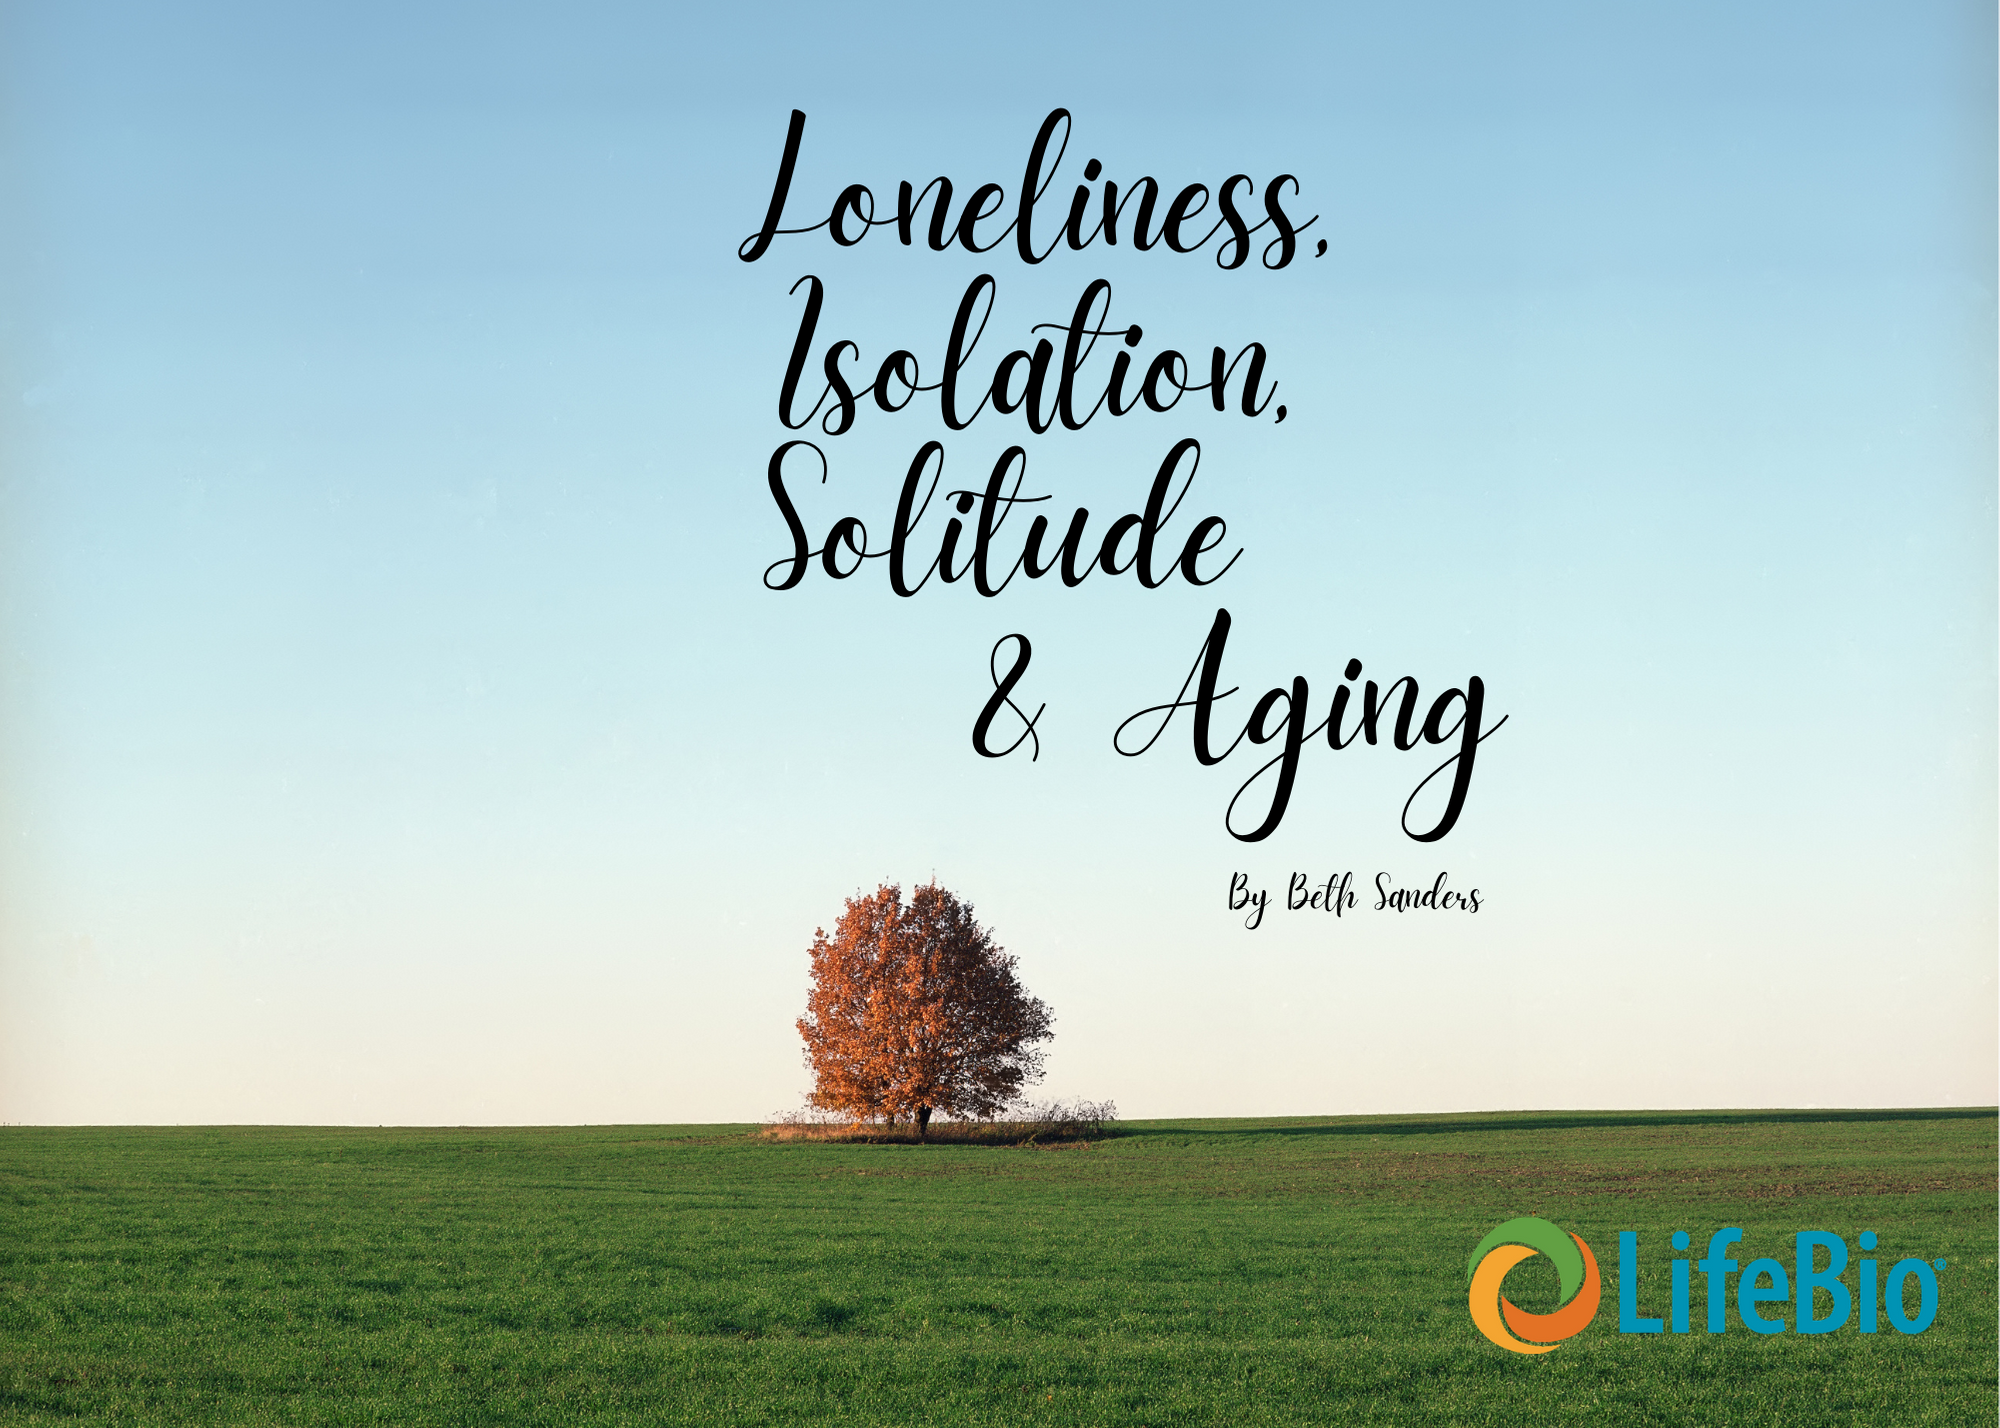 Experiences of Loneliness, Social Isolation, & Solitude for Older Adults